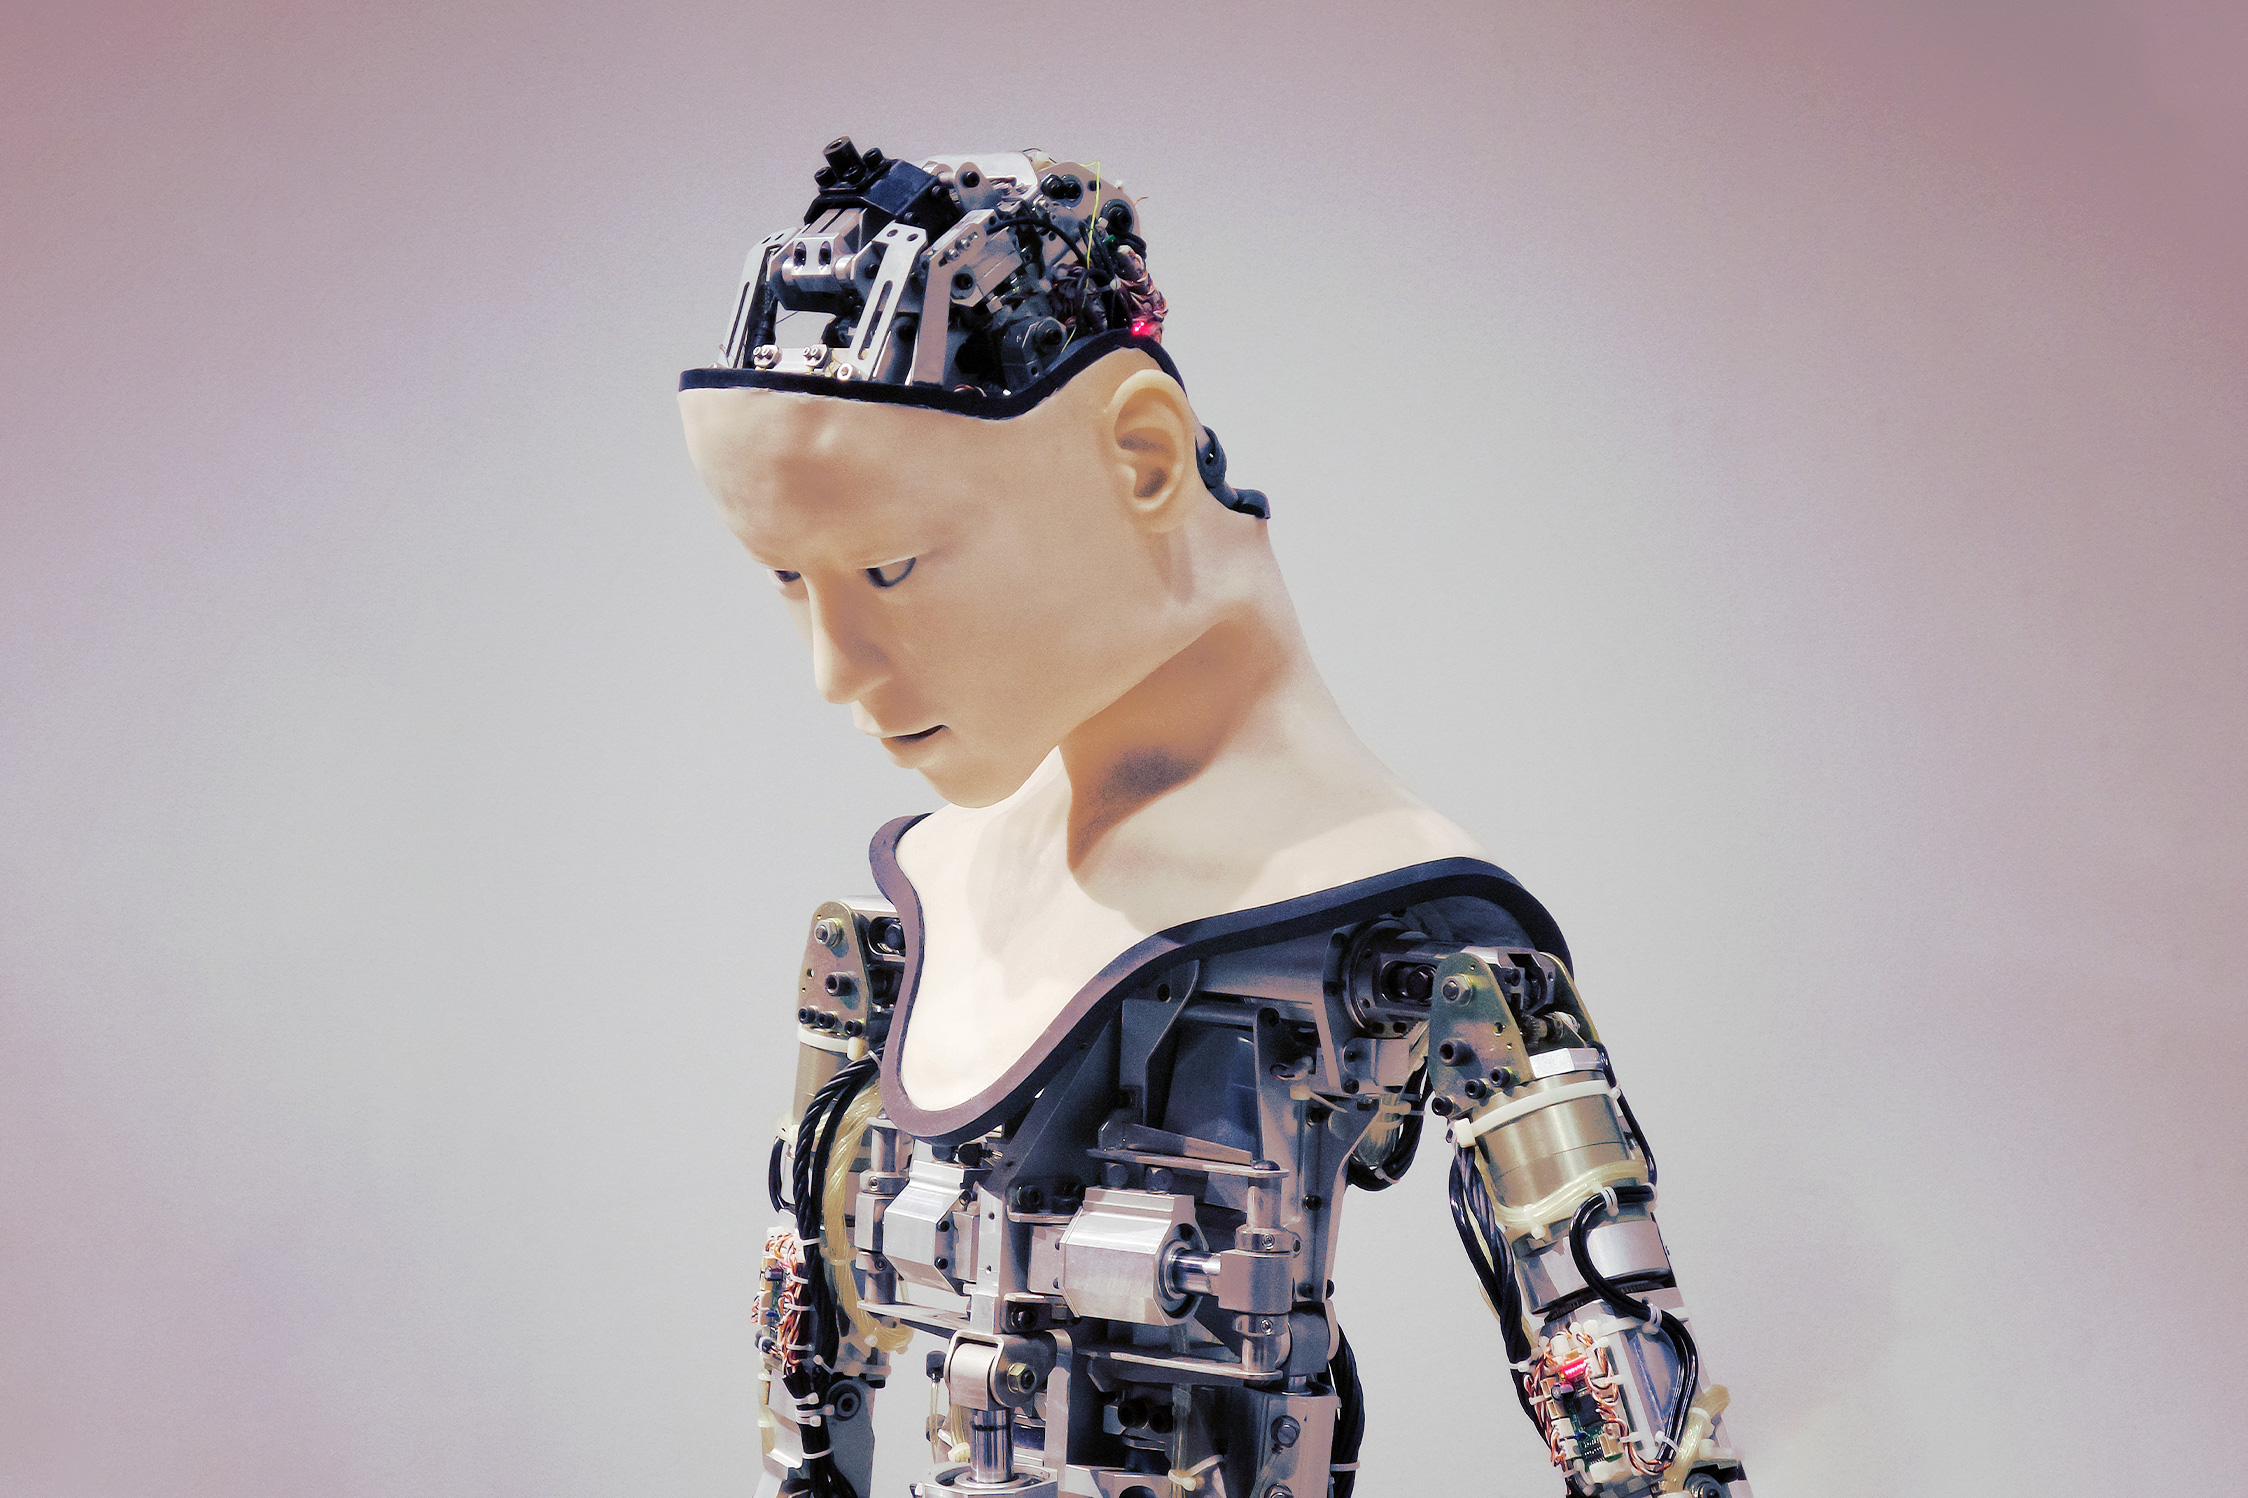 Scientists Say They're Now Actively Trying to Build Conscious Robots